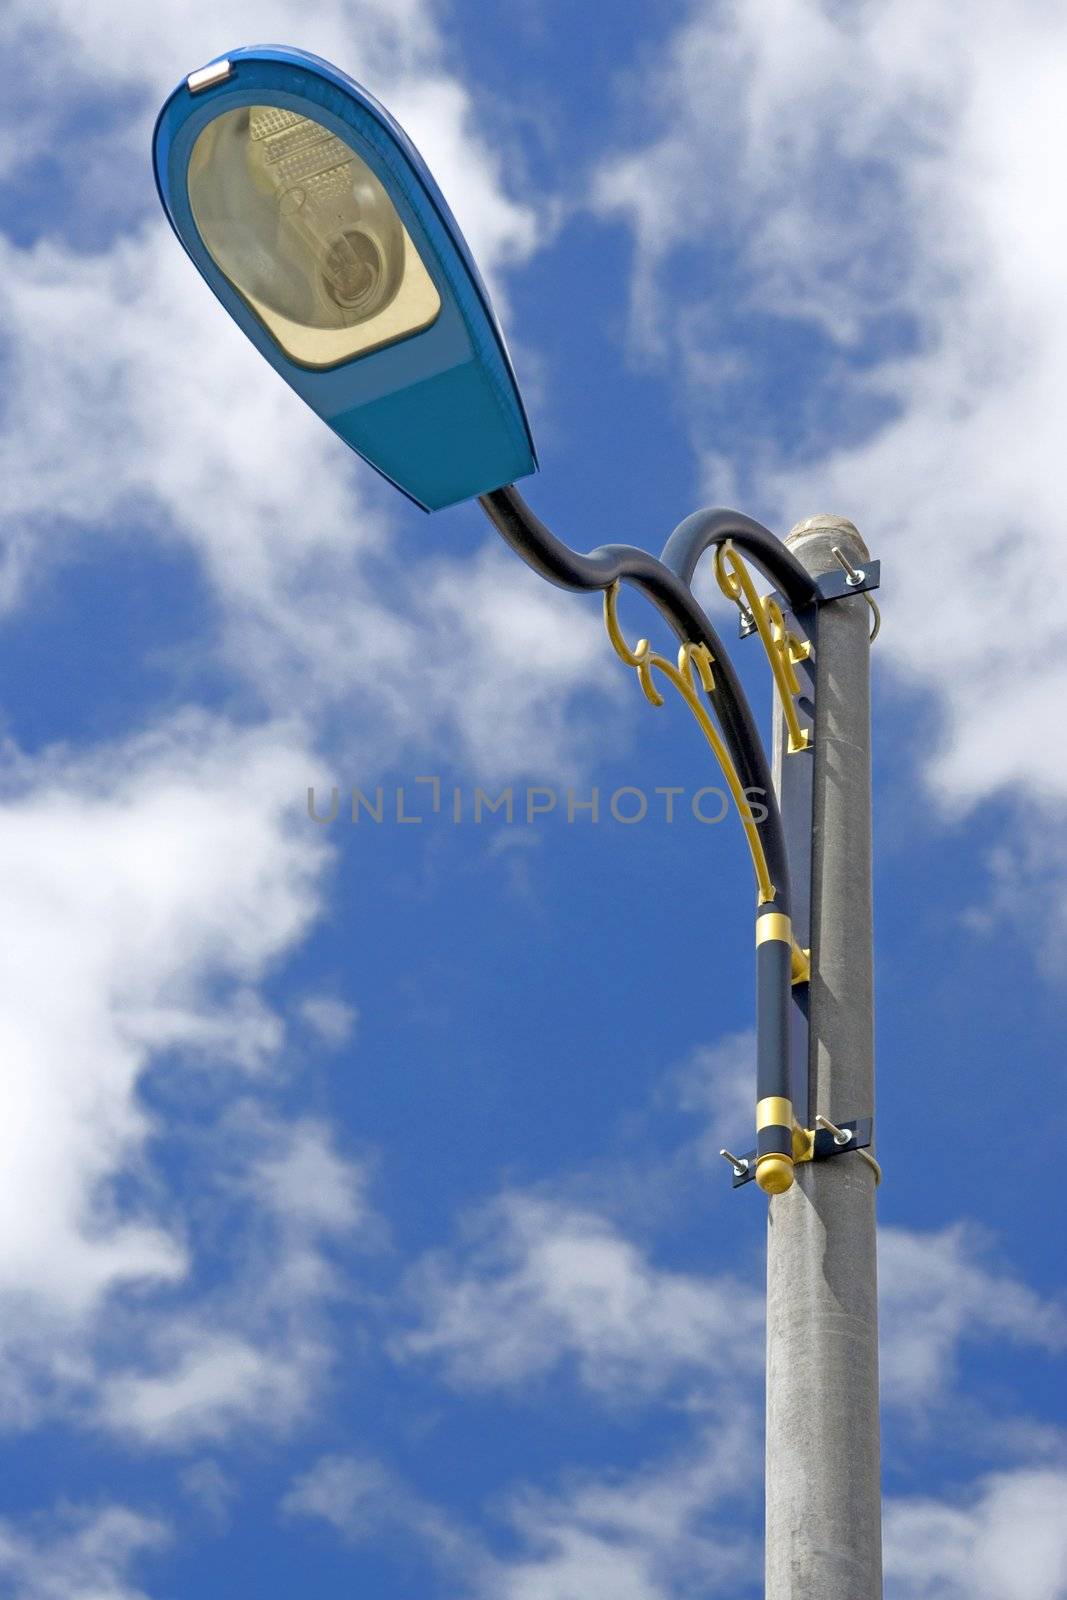 Image of a lamp post against a blue sky background.